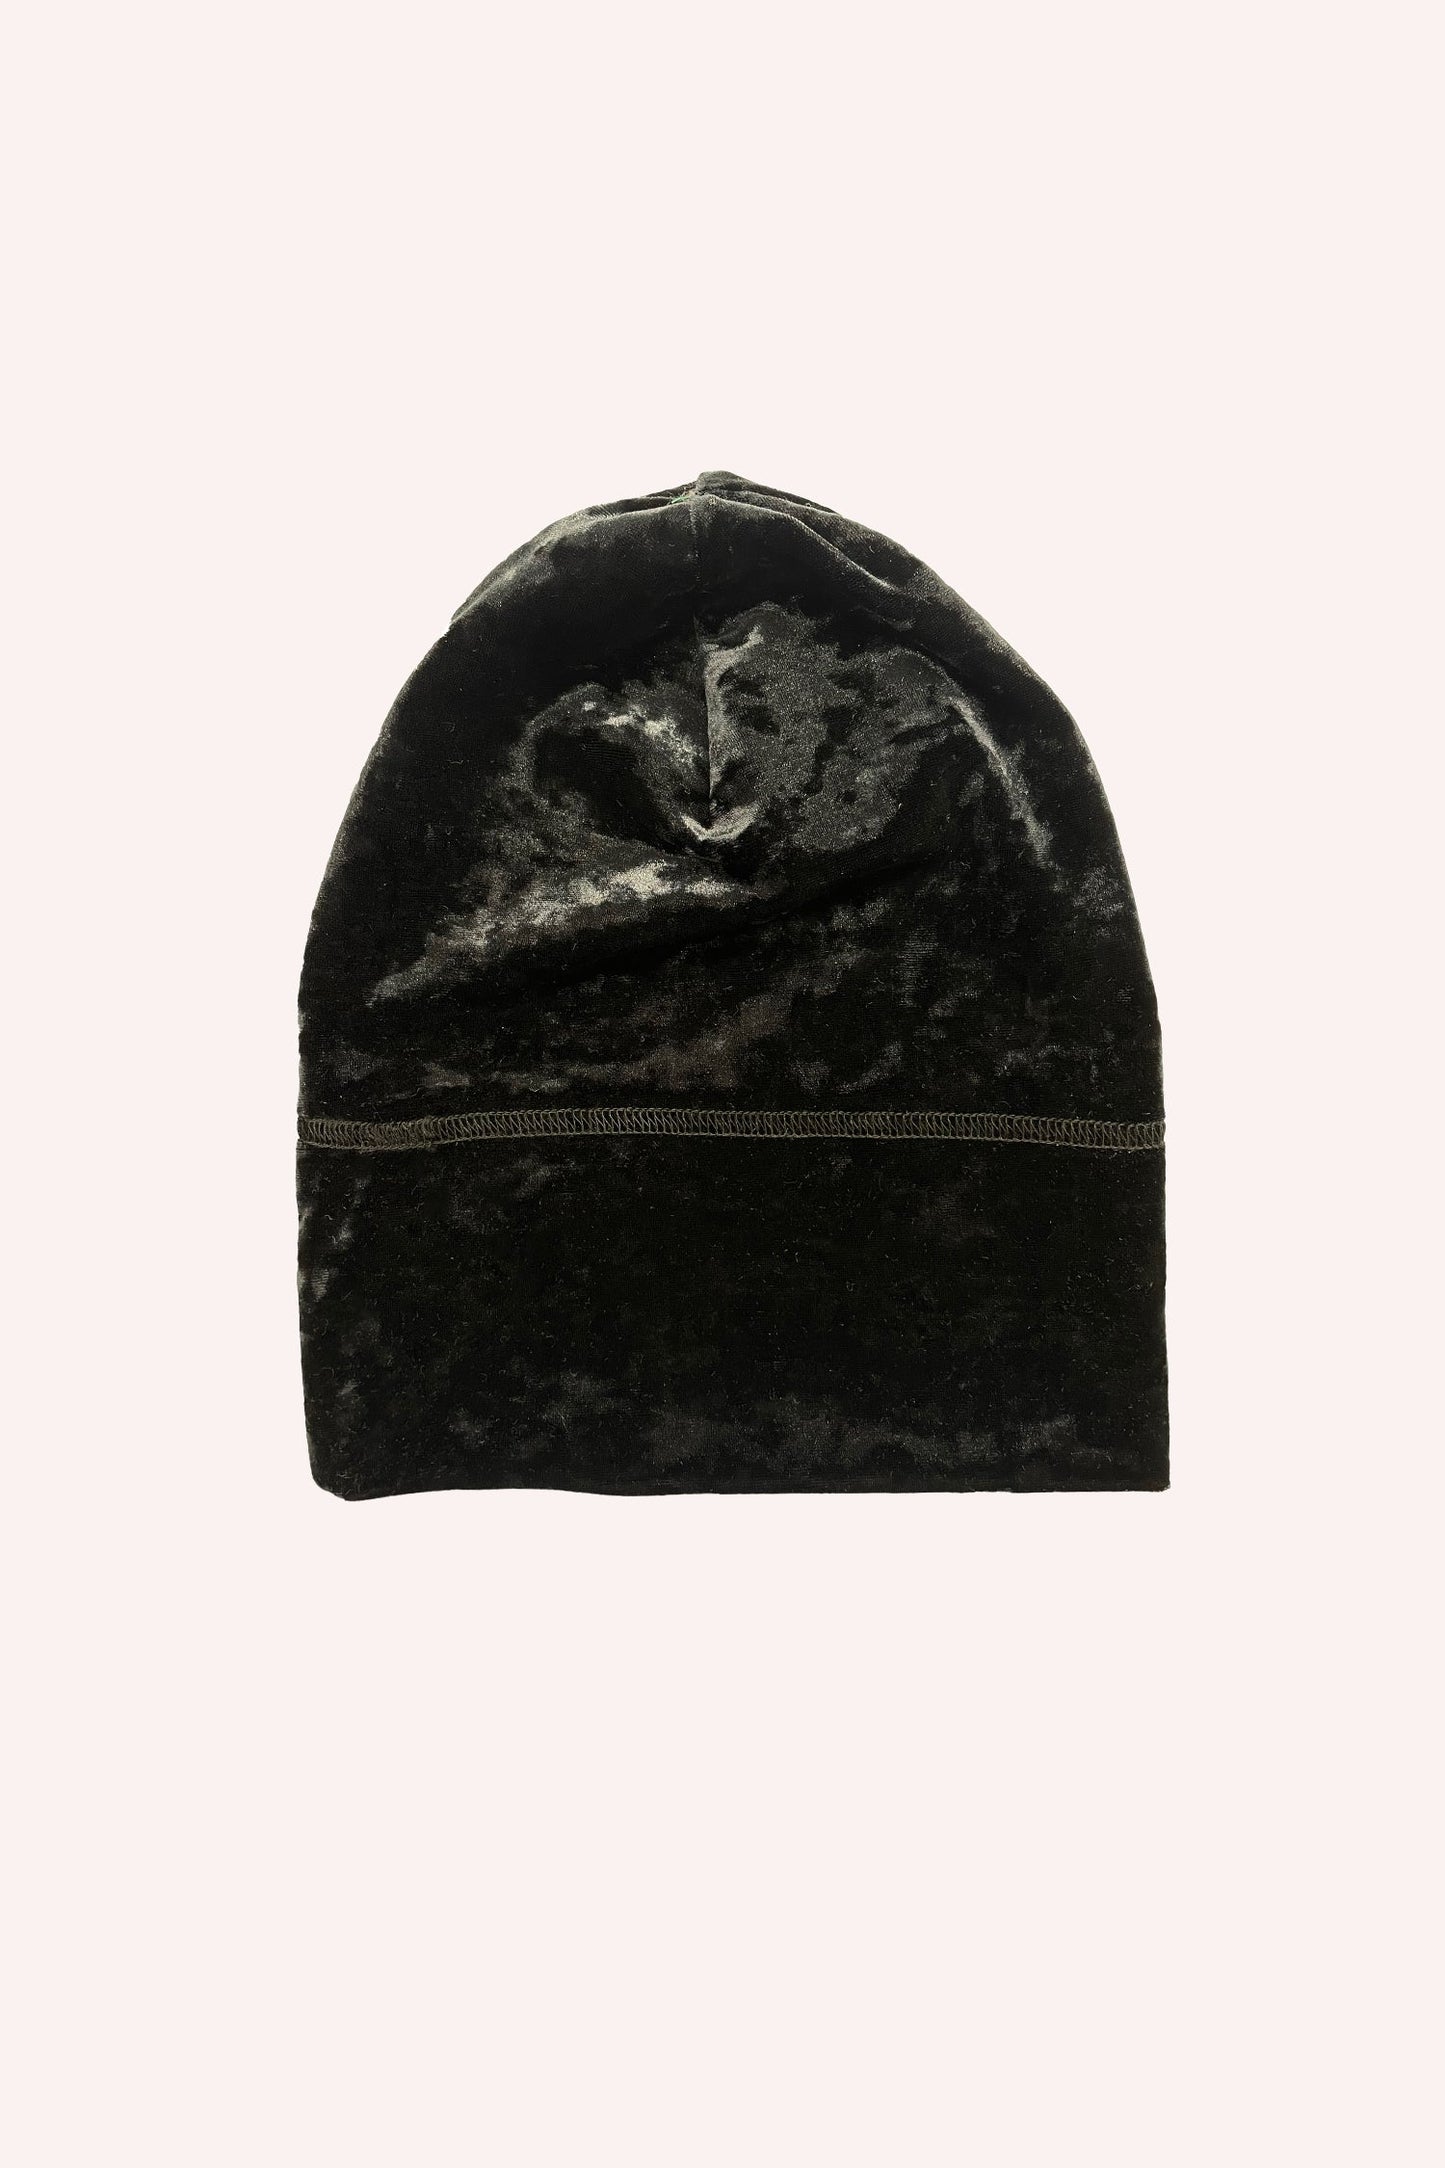 Stretch Velvet Beanie in black, with shiny effects. There are large grey stitches that run around it.